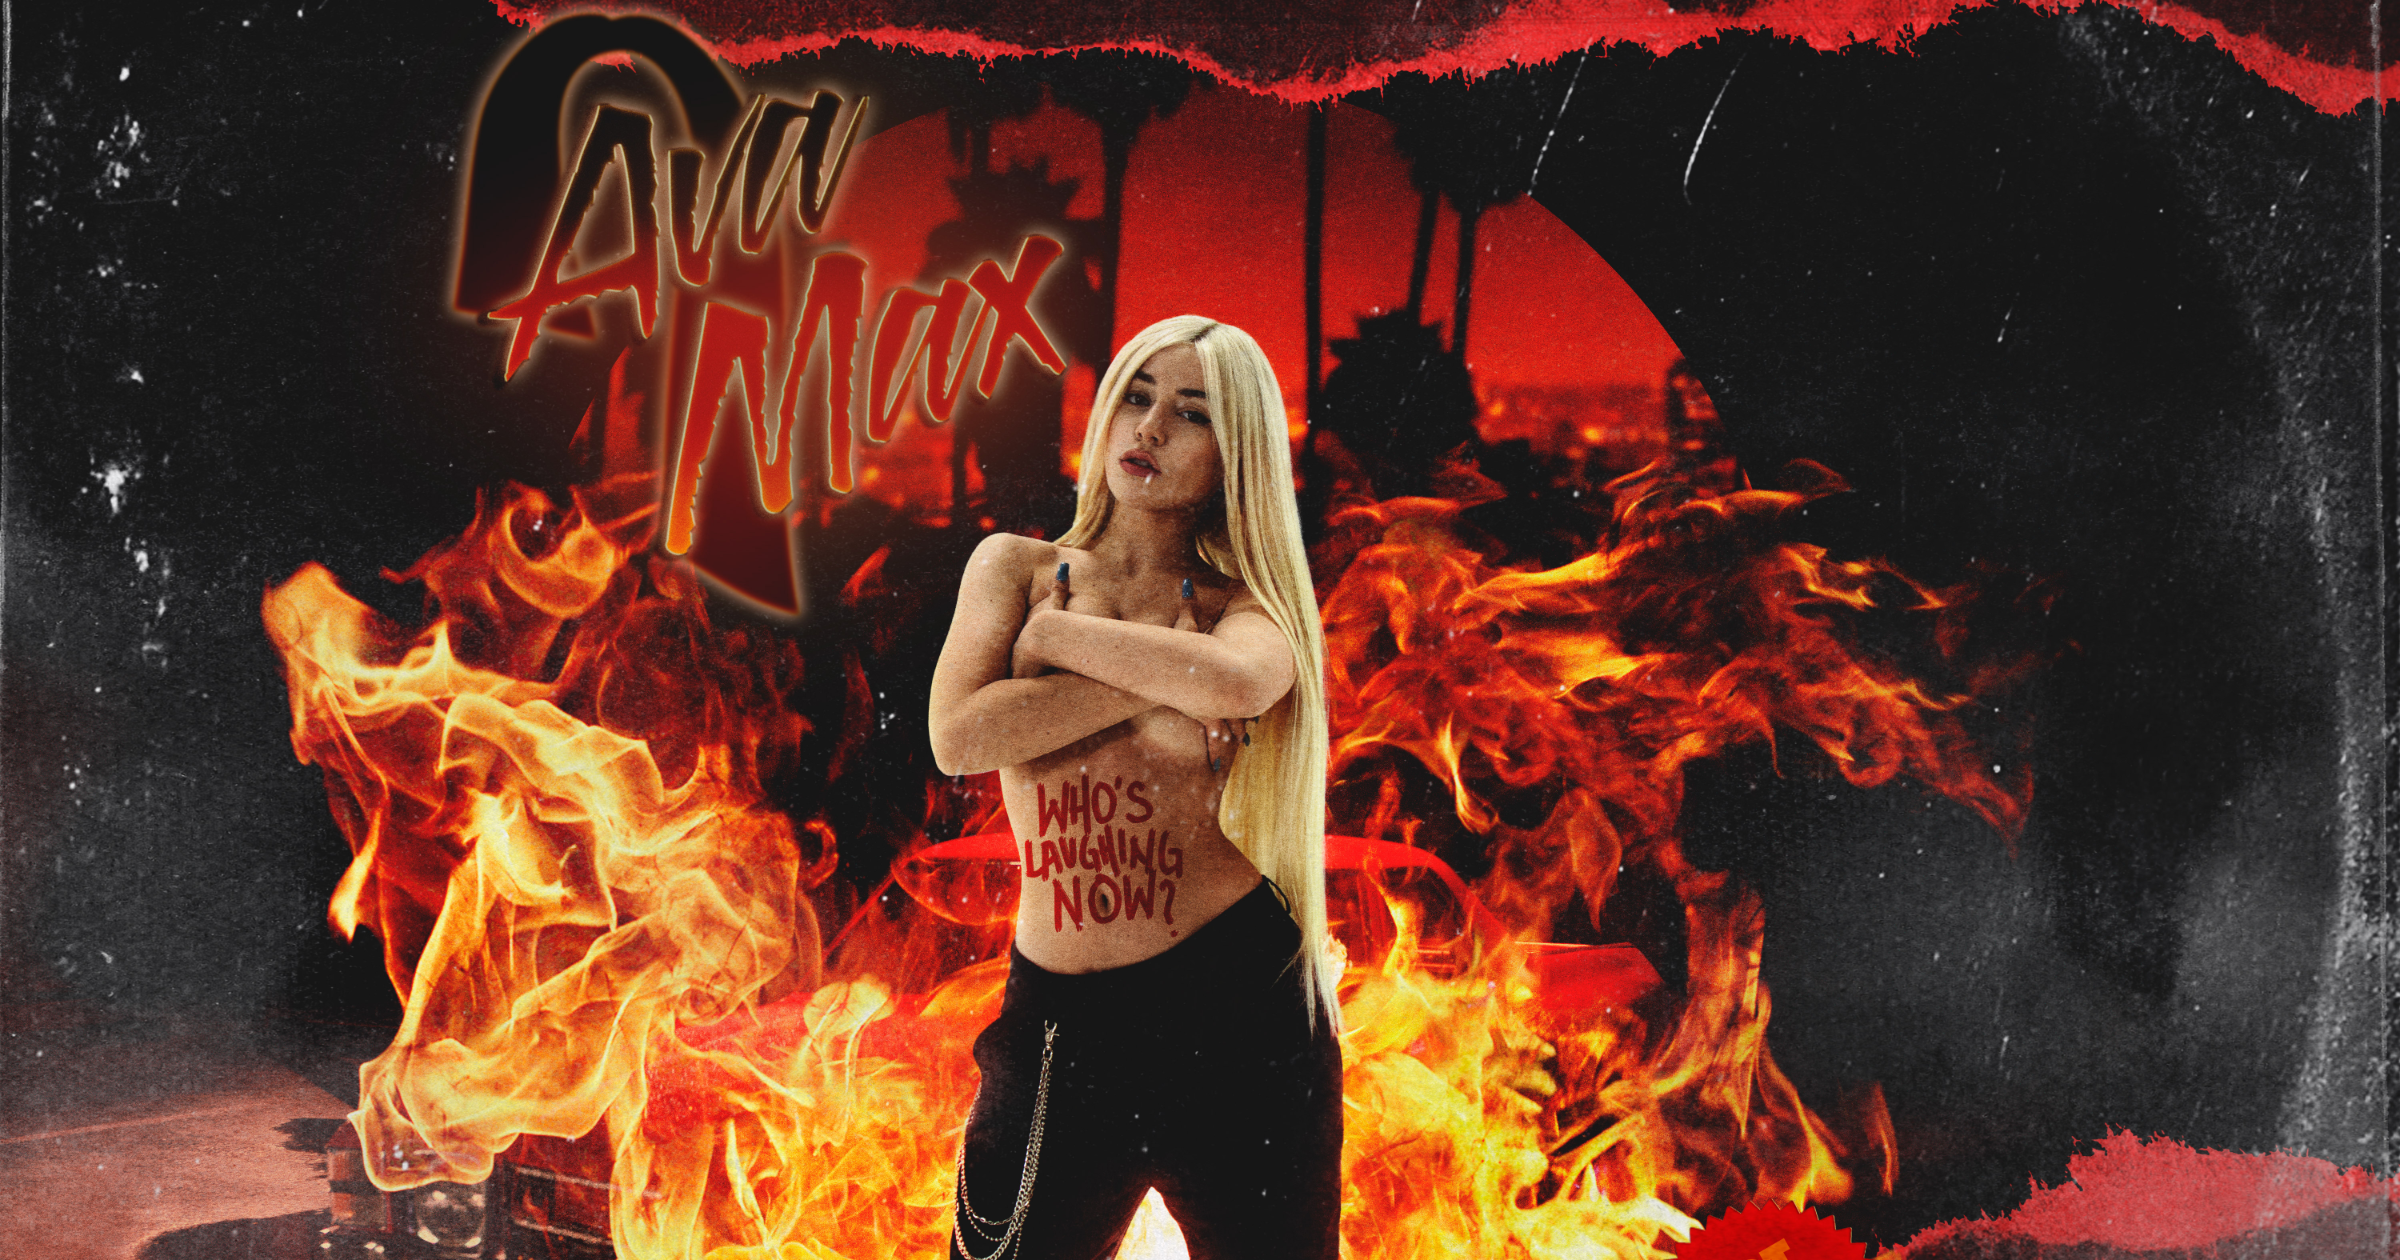 Take you to hell ava. Who’s laughing Now Эйва Макс. Эйва Макс Heaven Hell. Ava Max "Heaven & Hell". Ава Макс who's laughing.